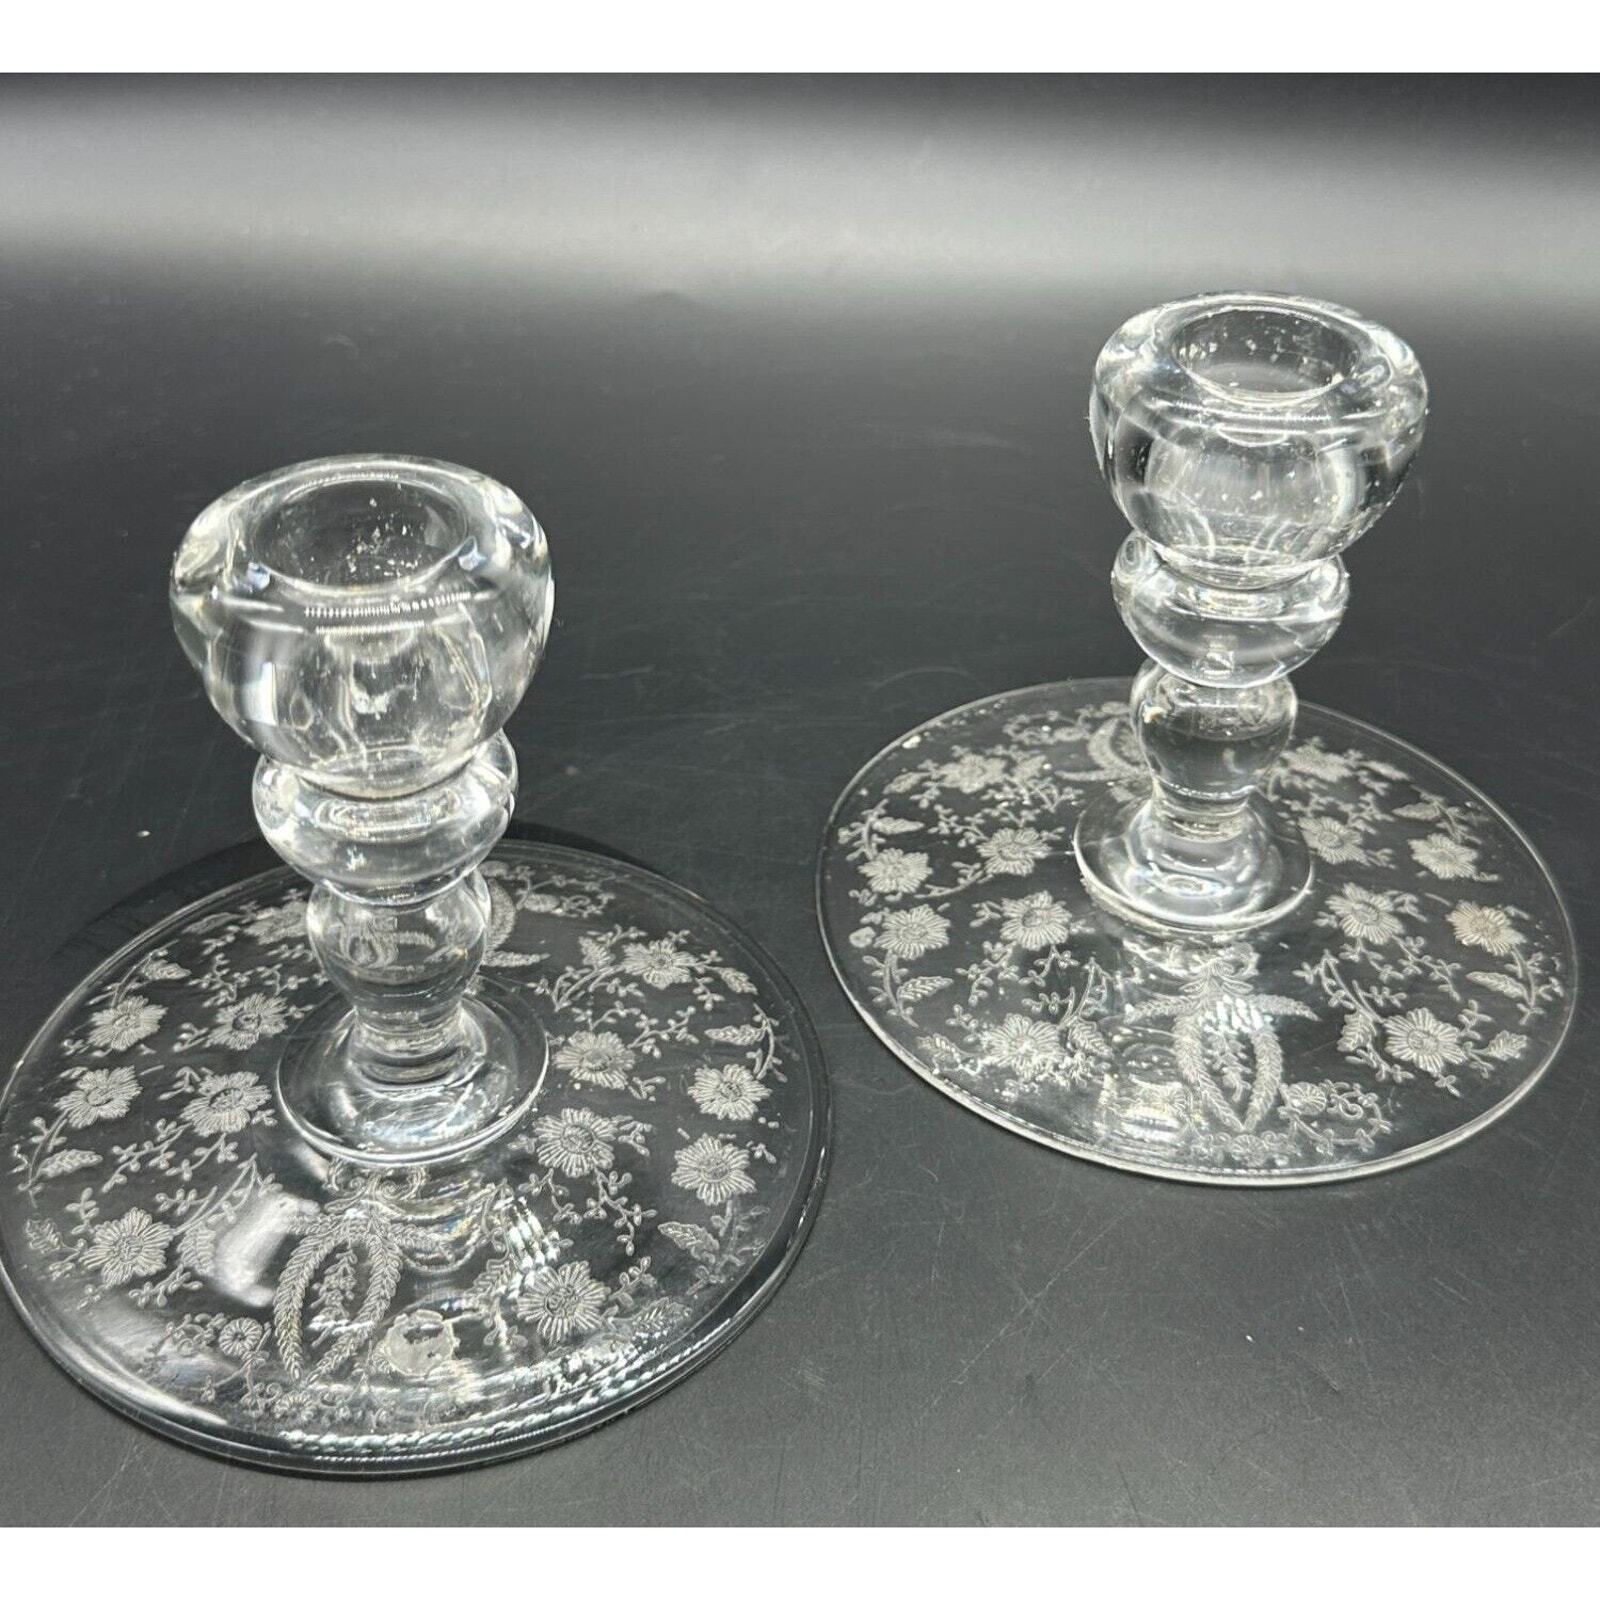 Viking Glass Co Prelude Etched Glass Candle Holders Set of 2 Vintage